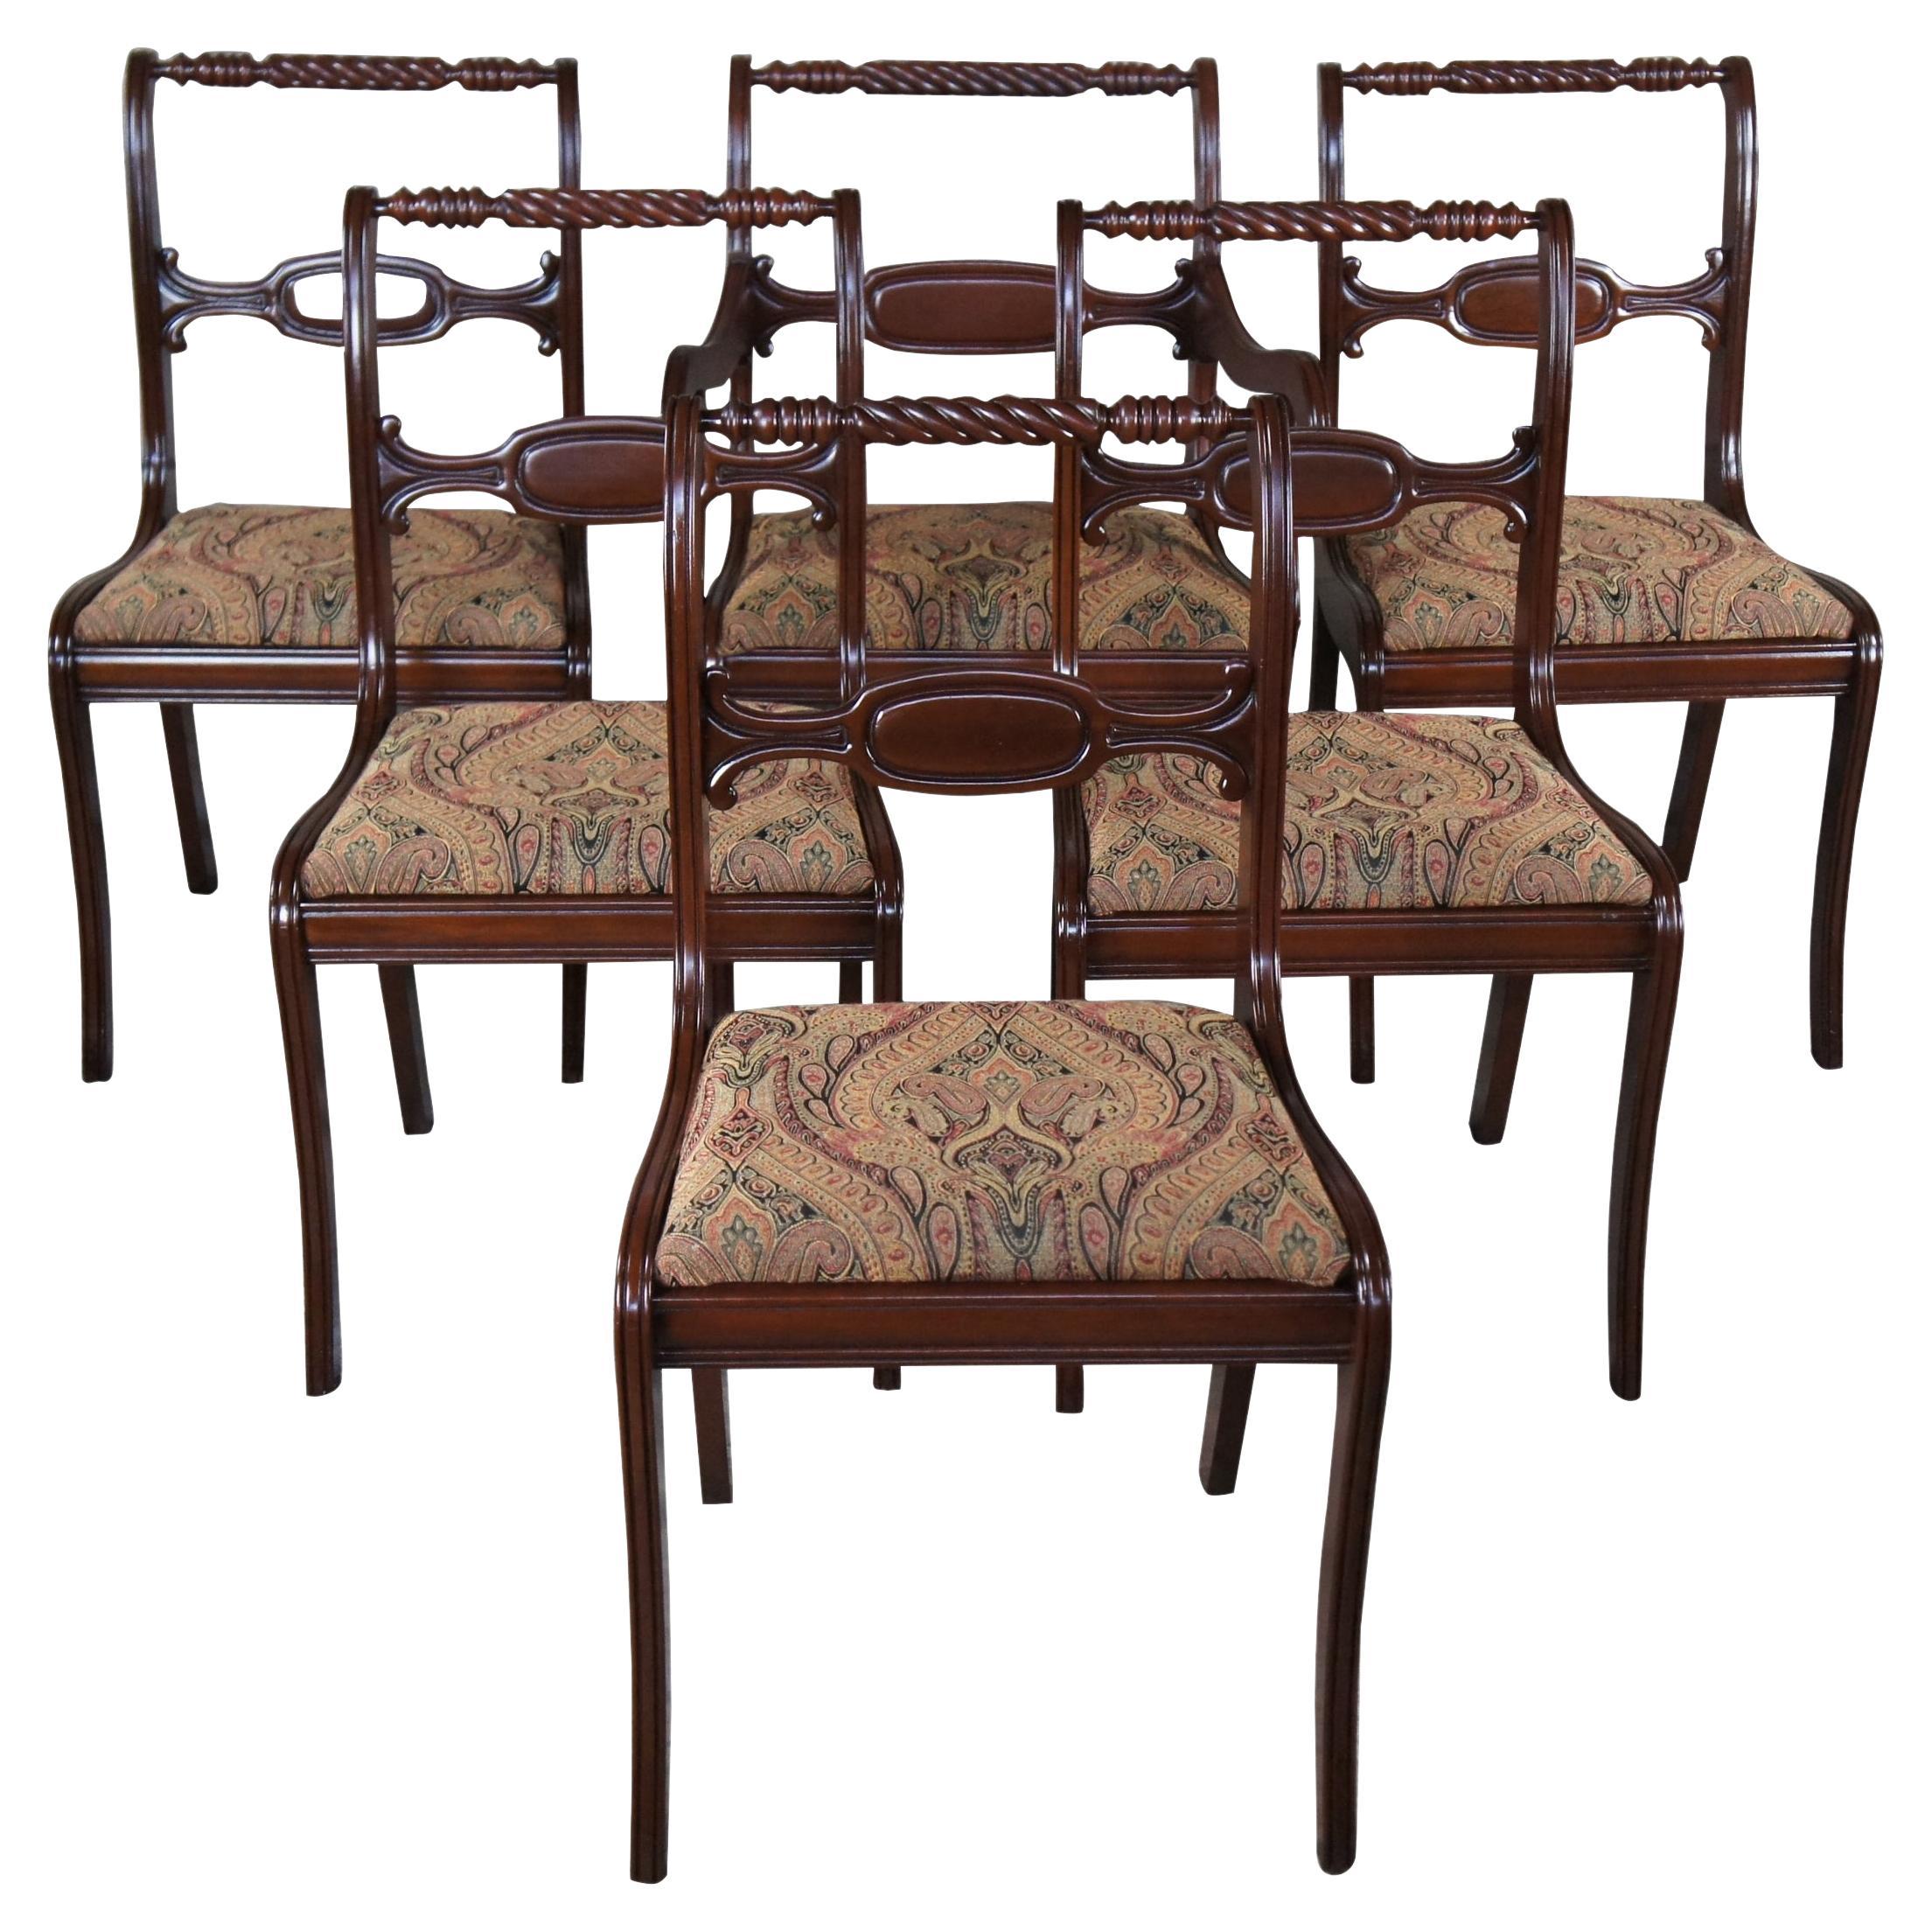 6 Antique Styled By Park English Regency American Cherry Paisley Dining Chairs  For Sale